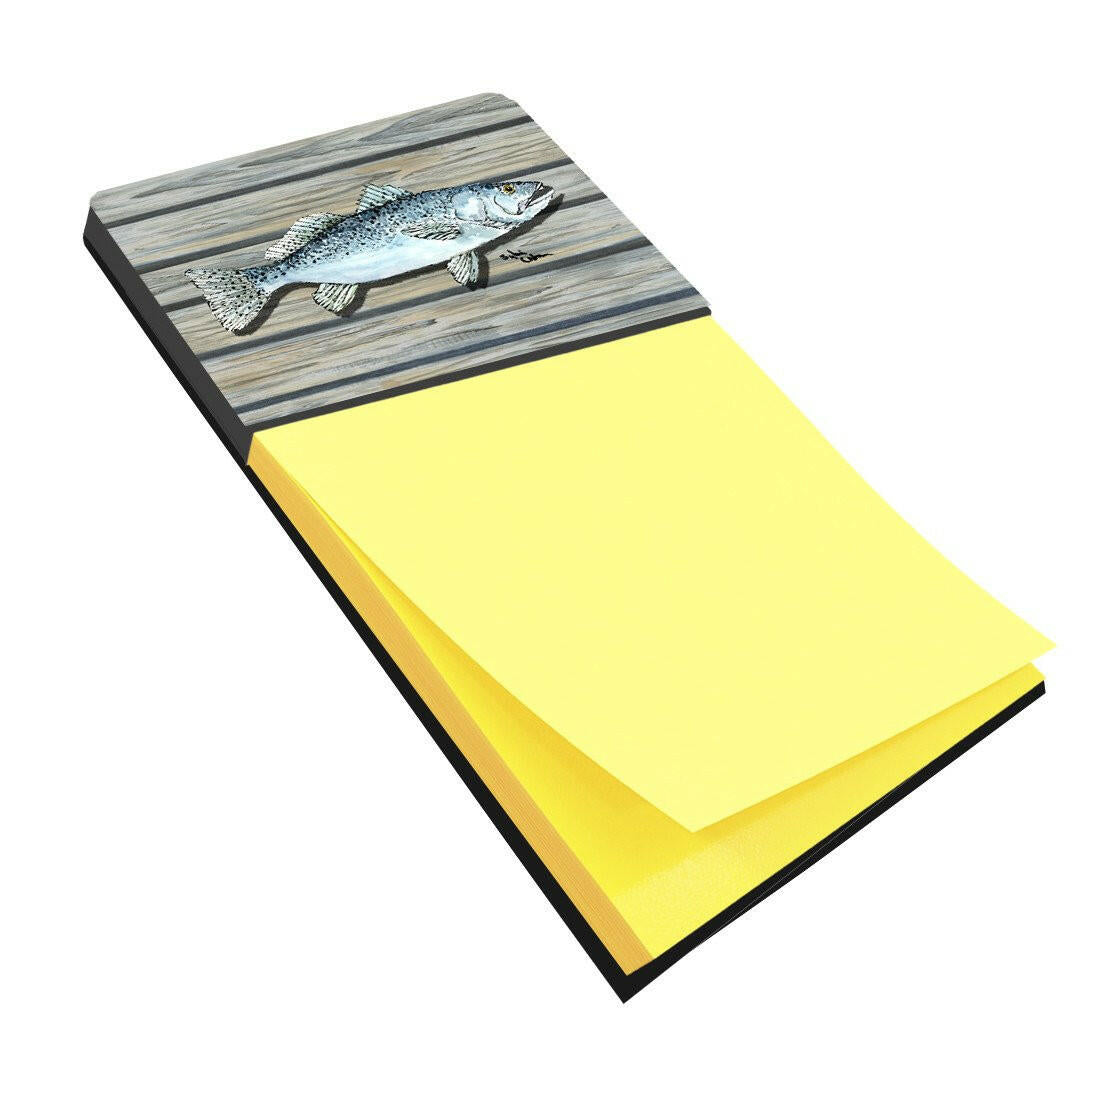 Fish Speckled Trout Refiillable Sticky Note Holder or Postit Note Dispenser 8494SN by Caroline's Treasures